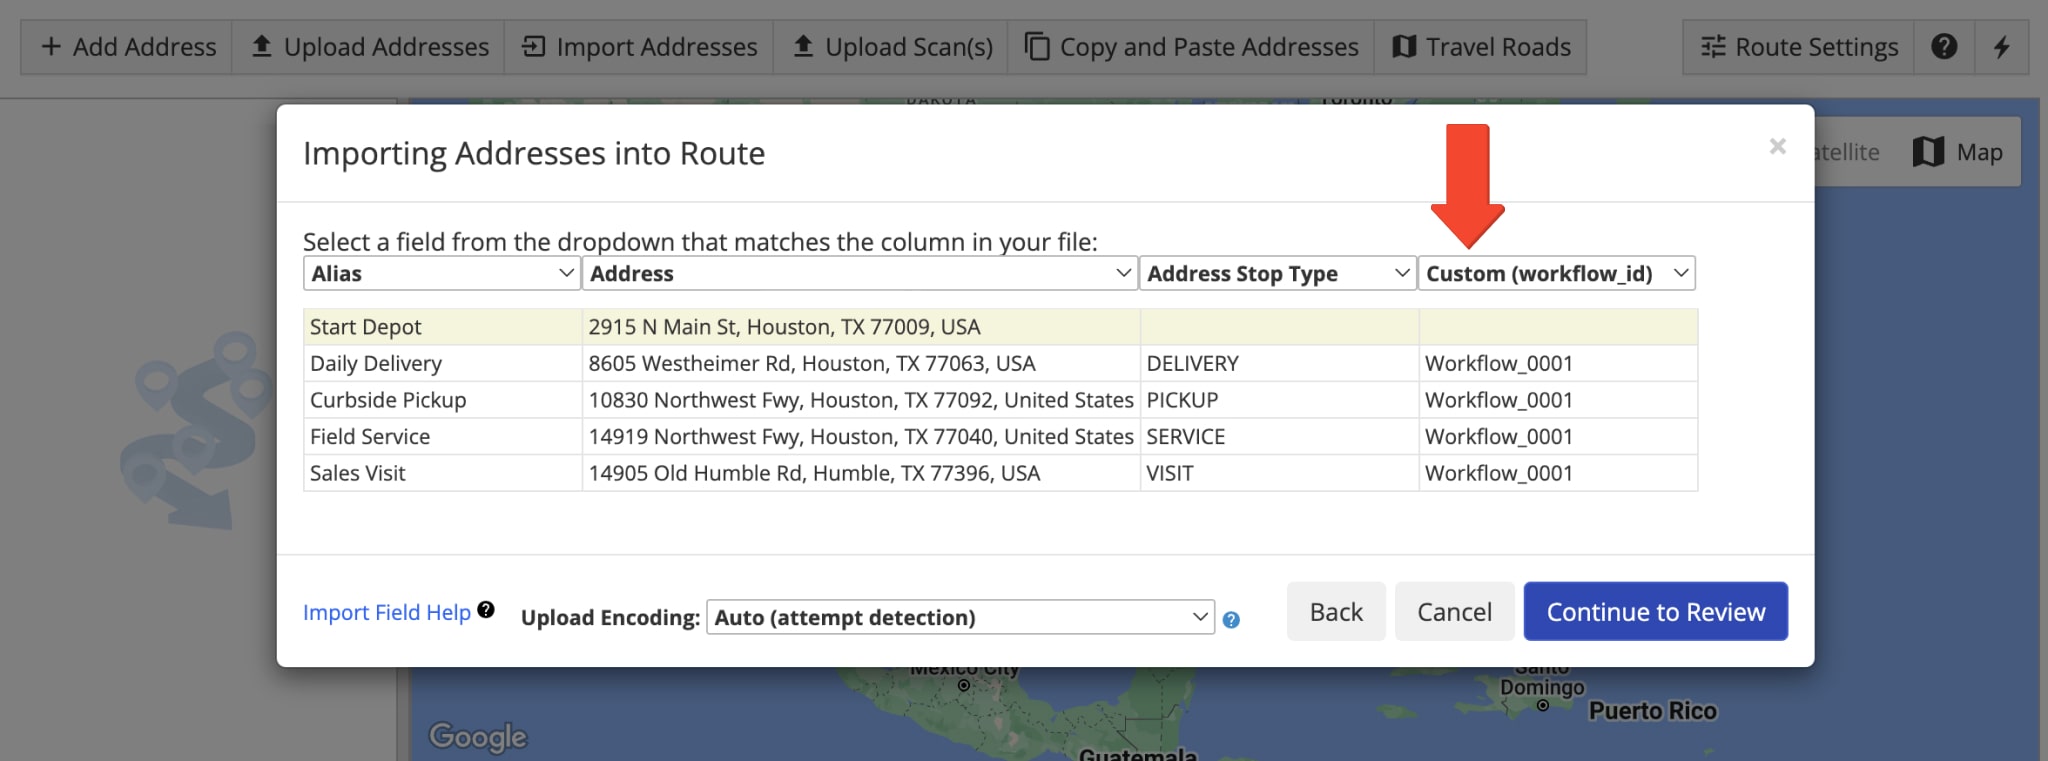 Upload route spreadsheet with addresses and Workflow IDs as Custom Data.